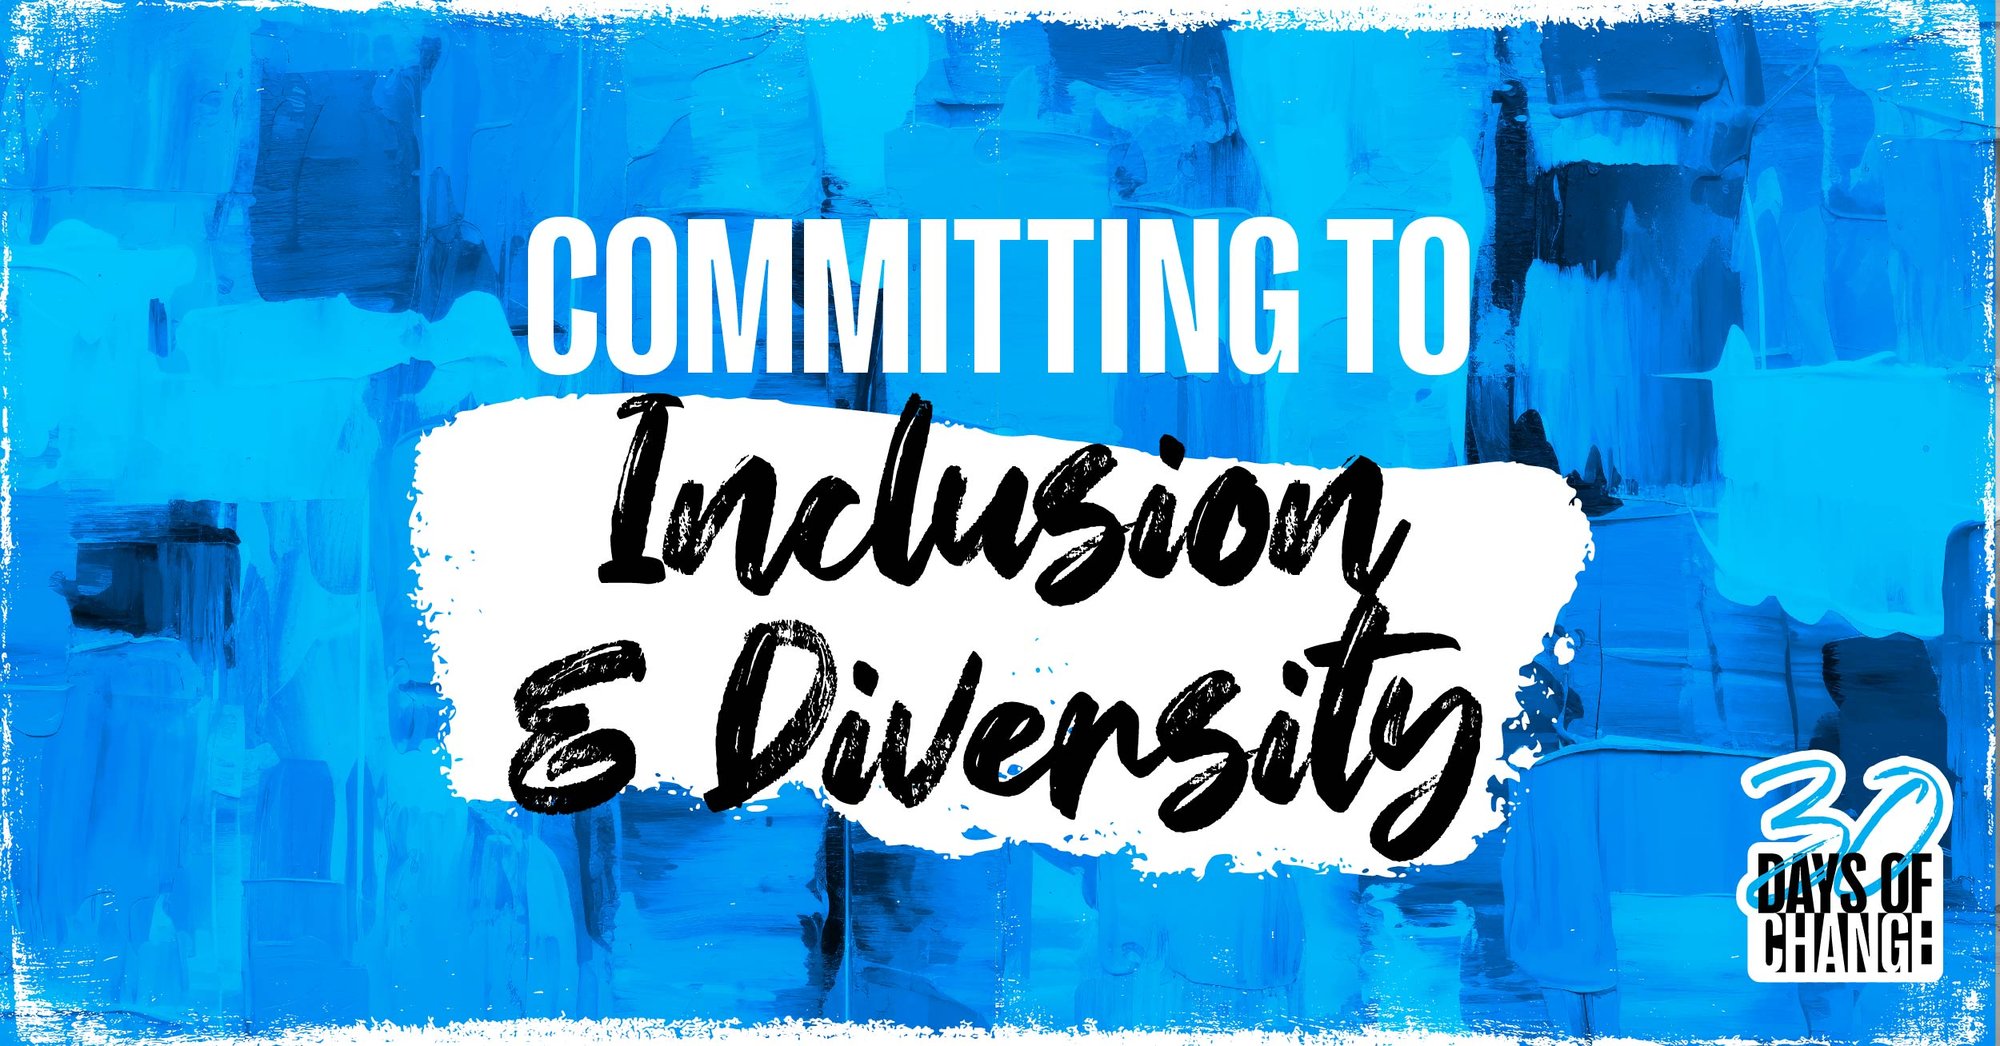 Committing to Inclusion & Diversity